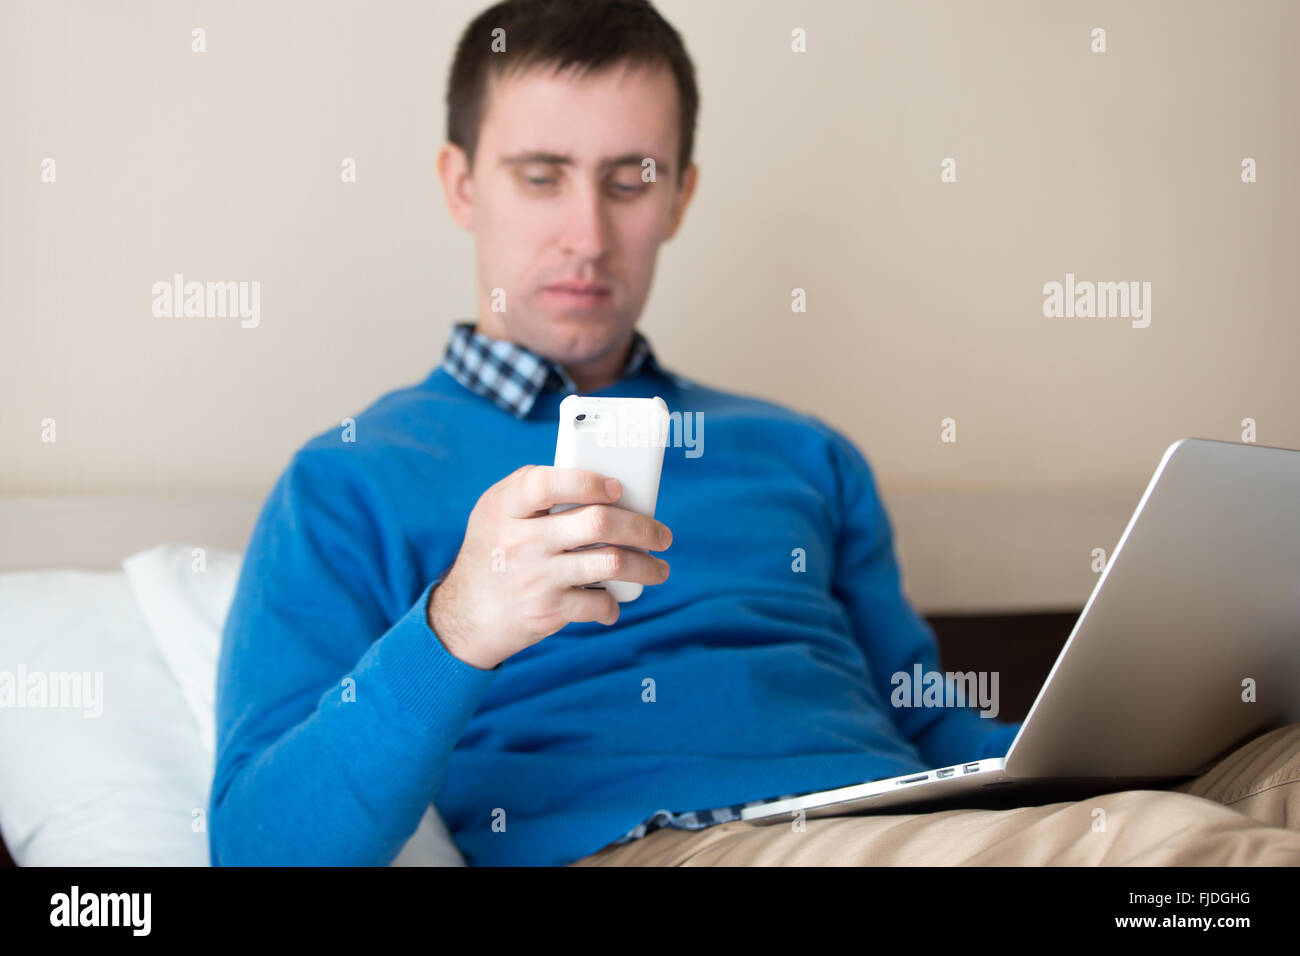 Portrait of attractive young man sitting on bed with laptop wearing smart casual clothing, using notebook and smartphone Stock Photo